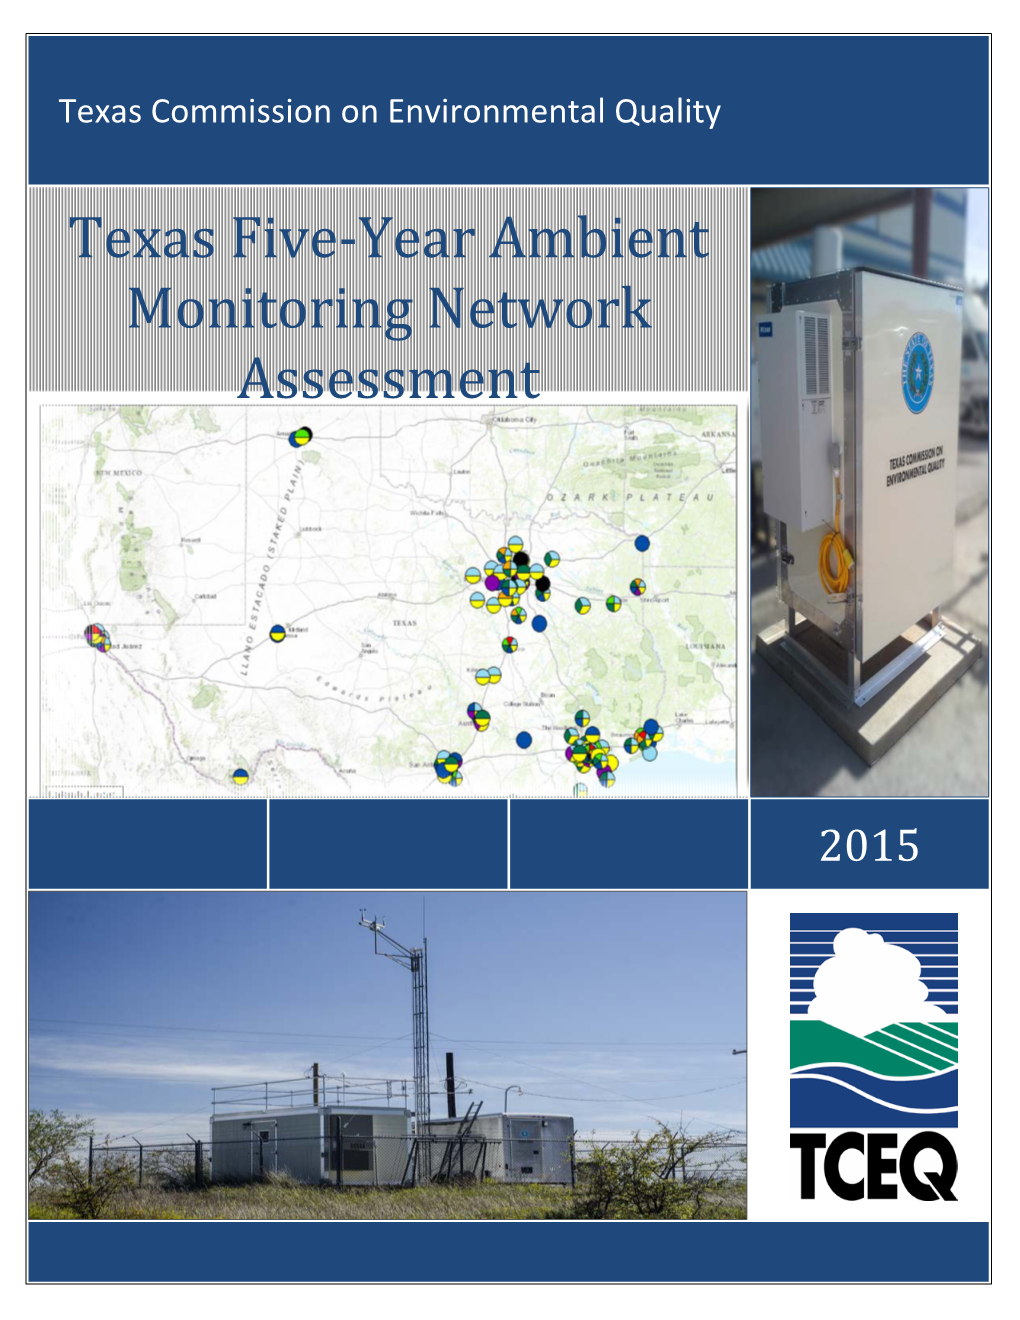 Texas Five-Year Ambient Monitoring Network Assessment